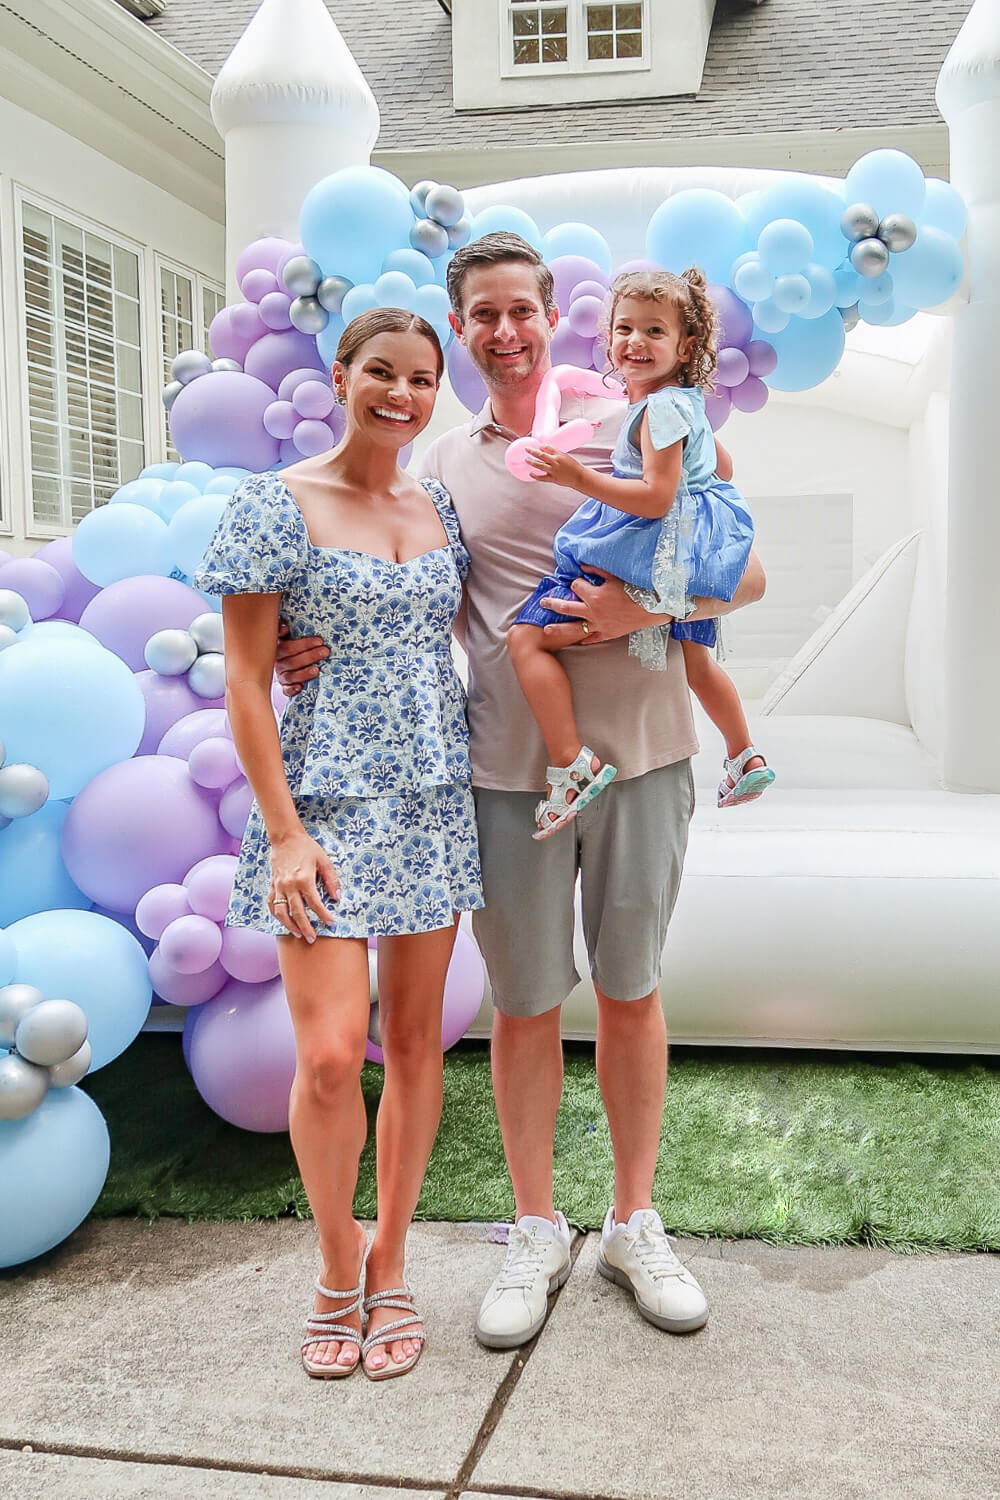 man and woman holding little girl dressed like Elsa in front of white bouncy castle and balloons arch